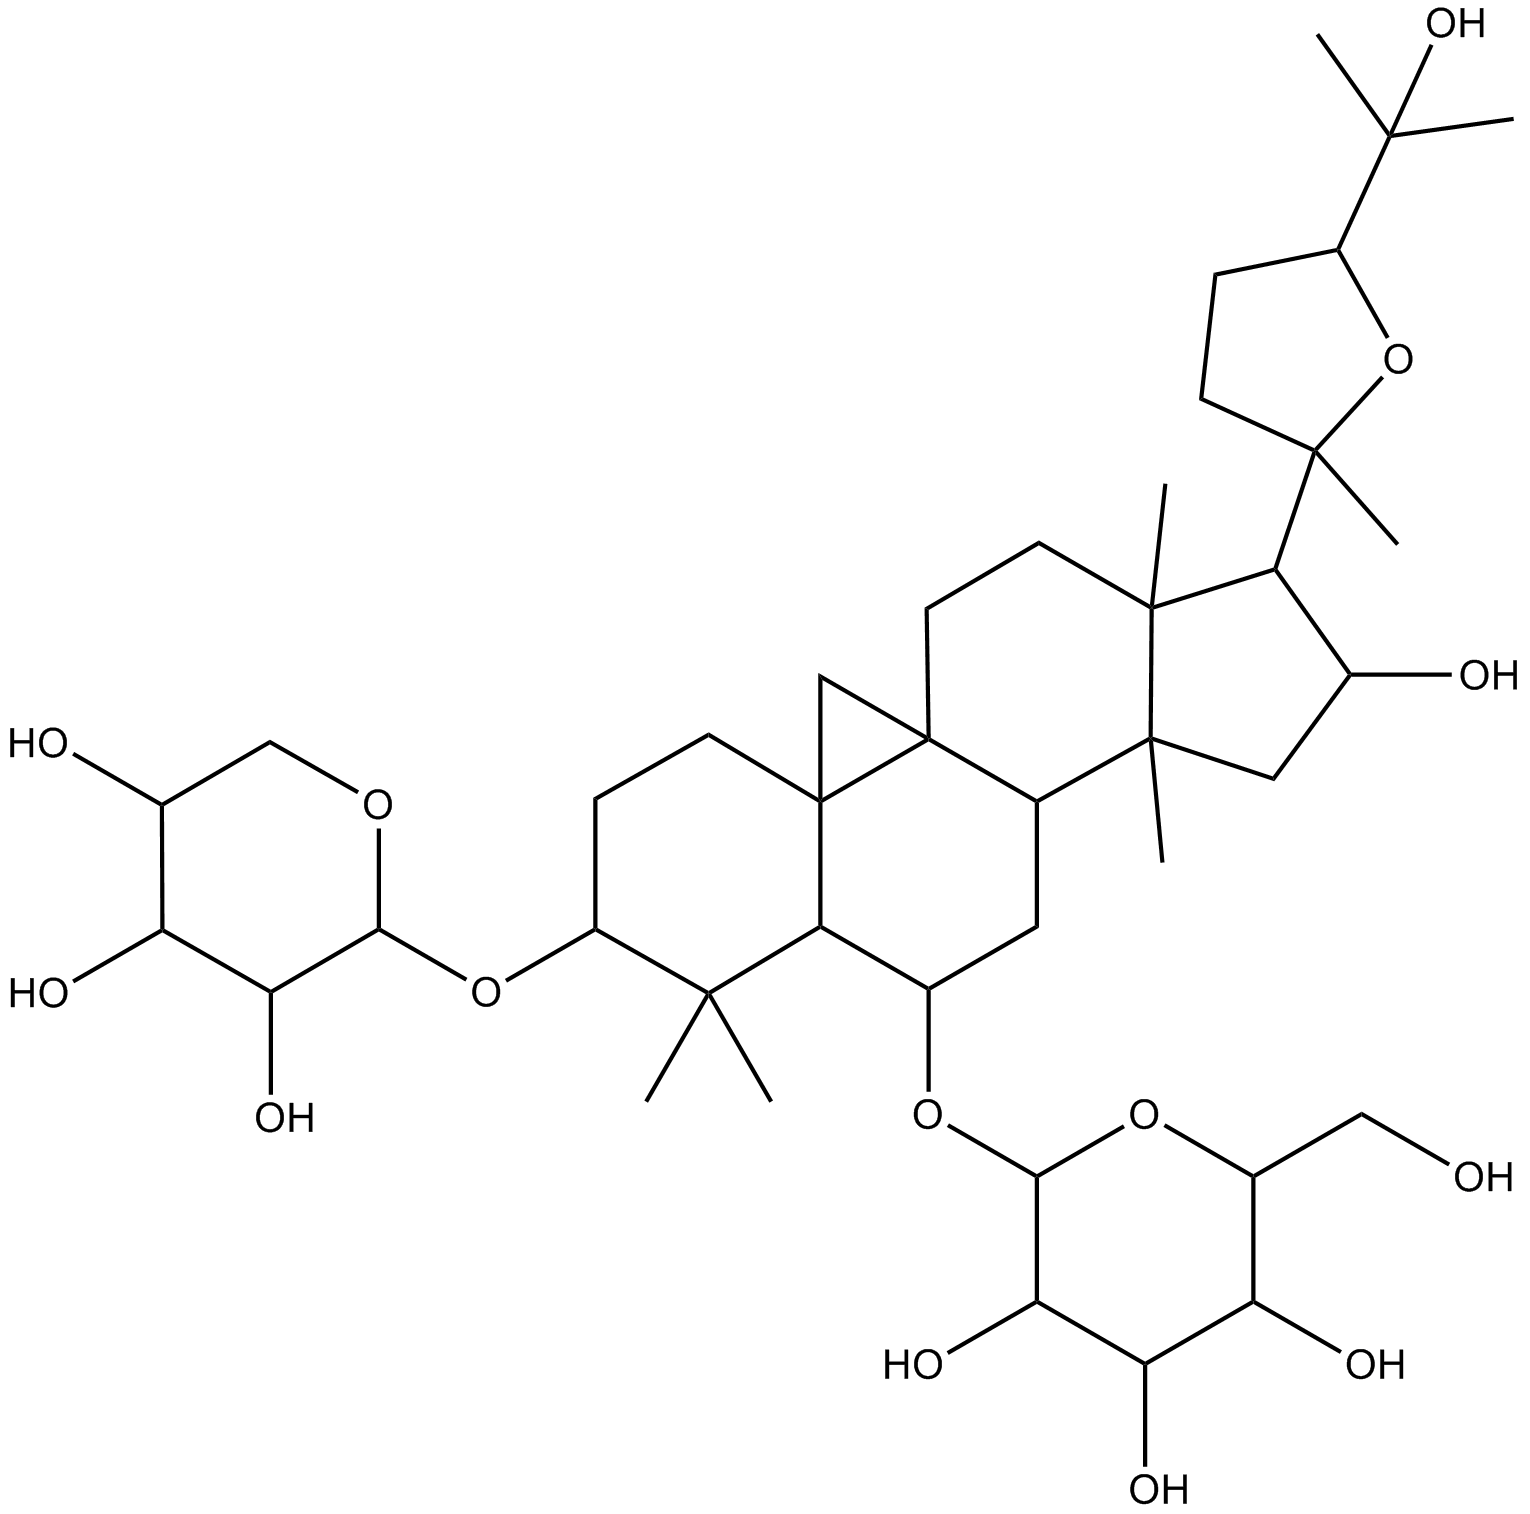 Astragaloside IV  Chemical Structure